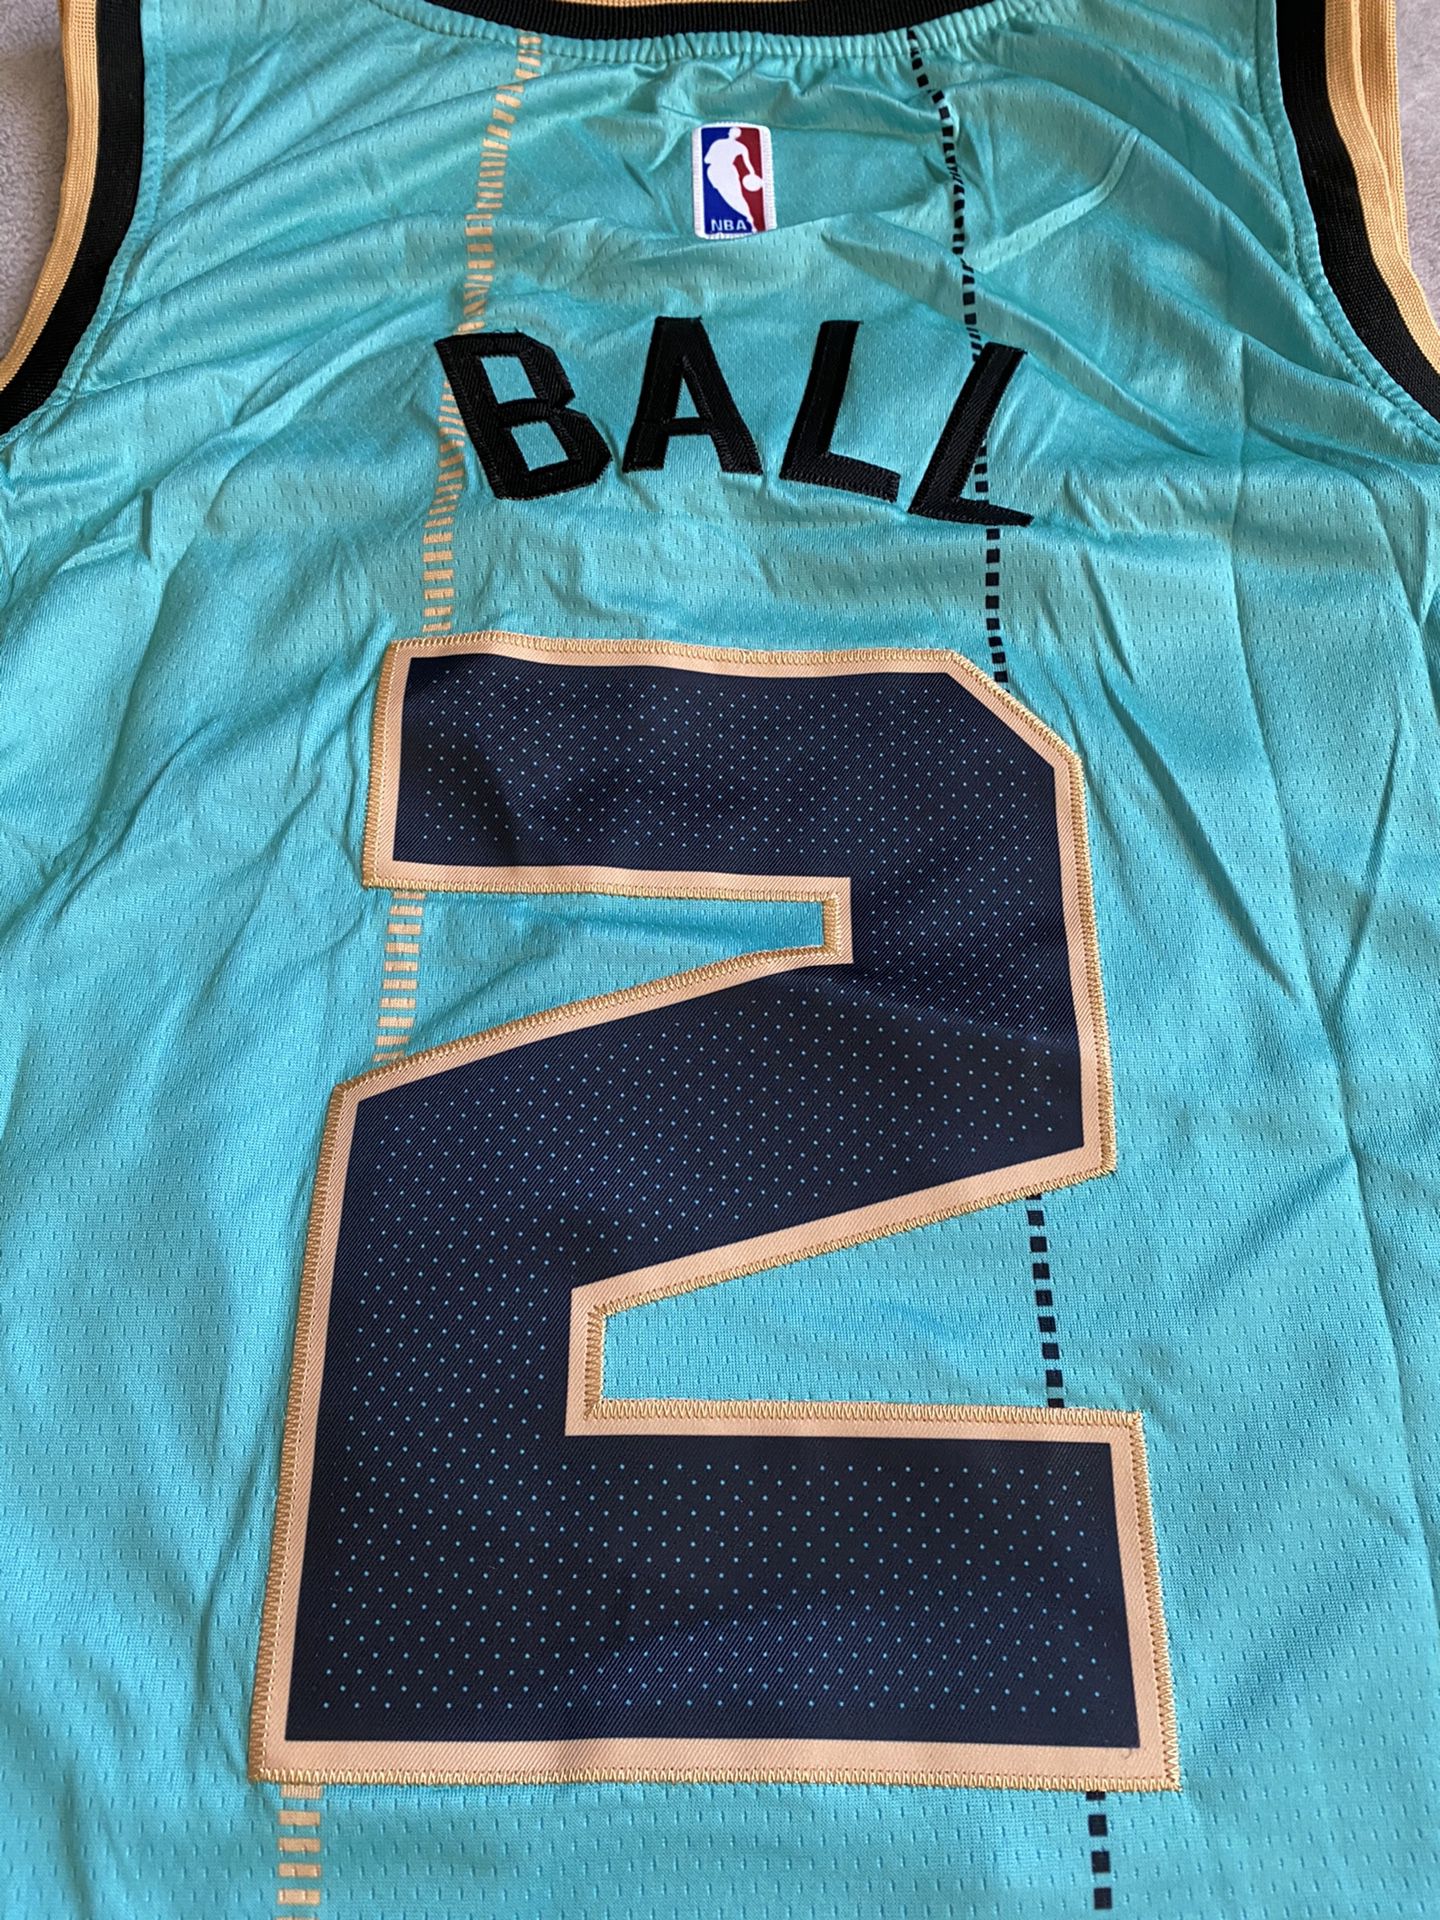 Lamelo Ball Charlotte Hornets Buzz City Jersey New W/Tags Size XL for Sale  in San Diego, CA - OfferUp